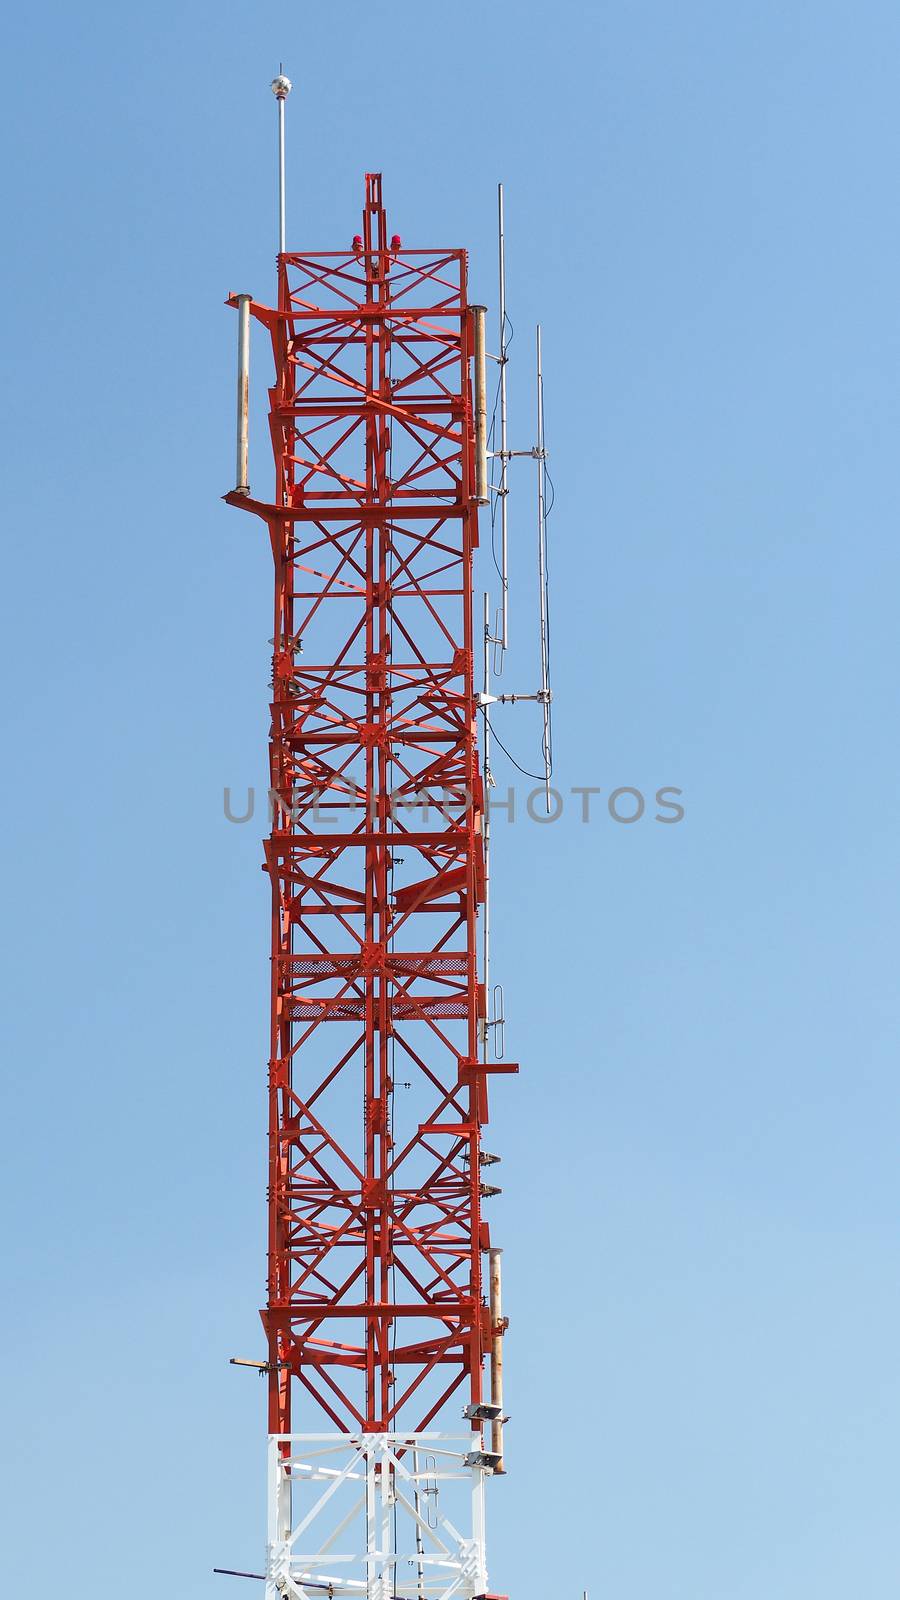 Telecommunication tower closeup with red and white color.